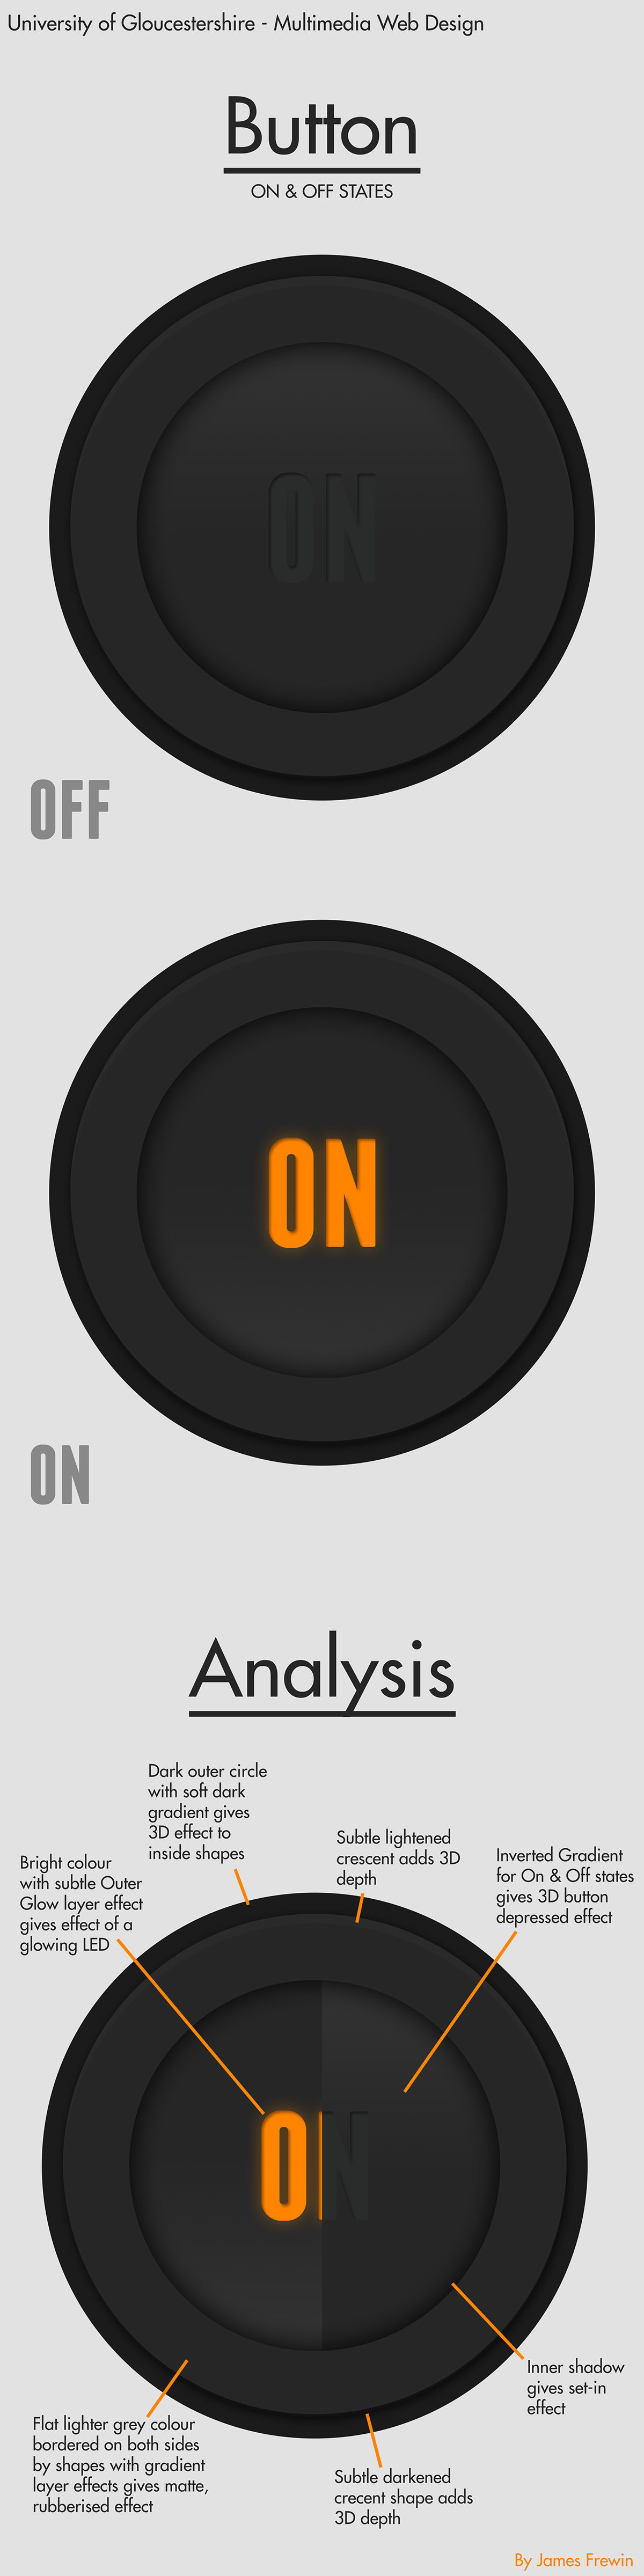 button on off 3D pressed state interaction UI ux interactive design fwin frewin